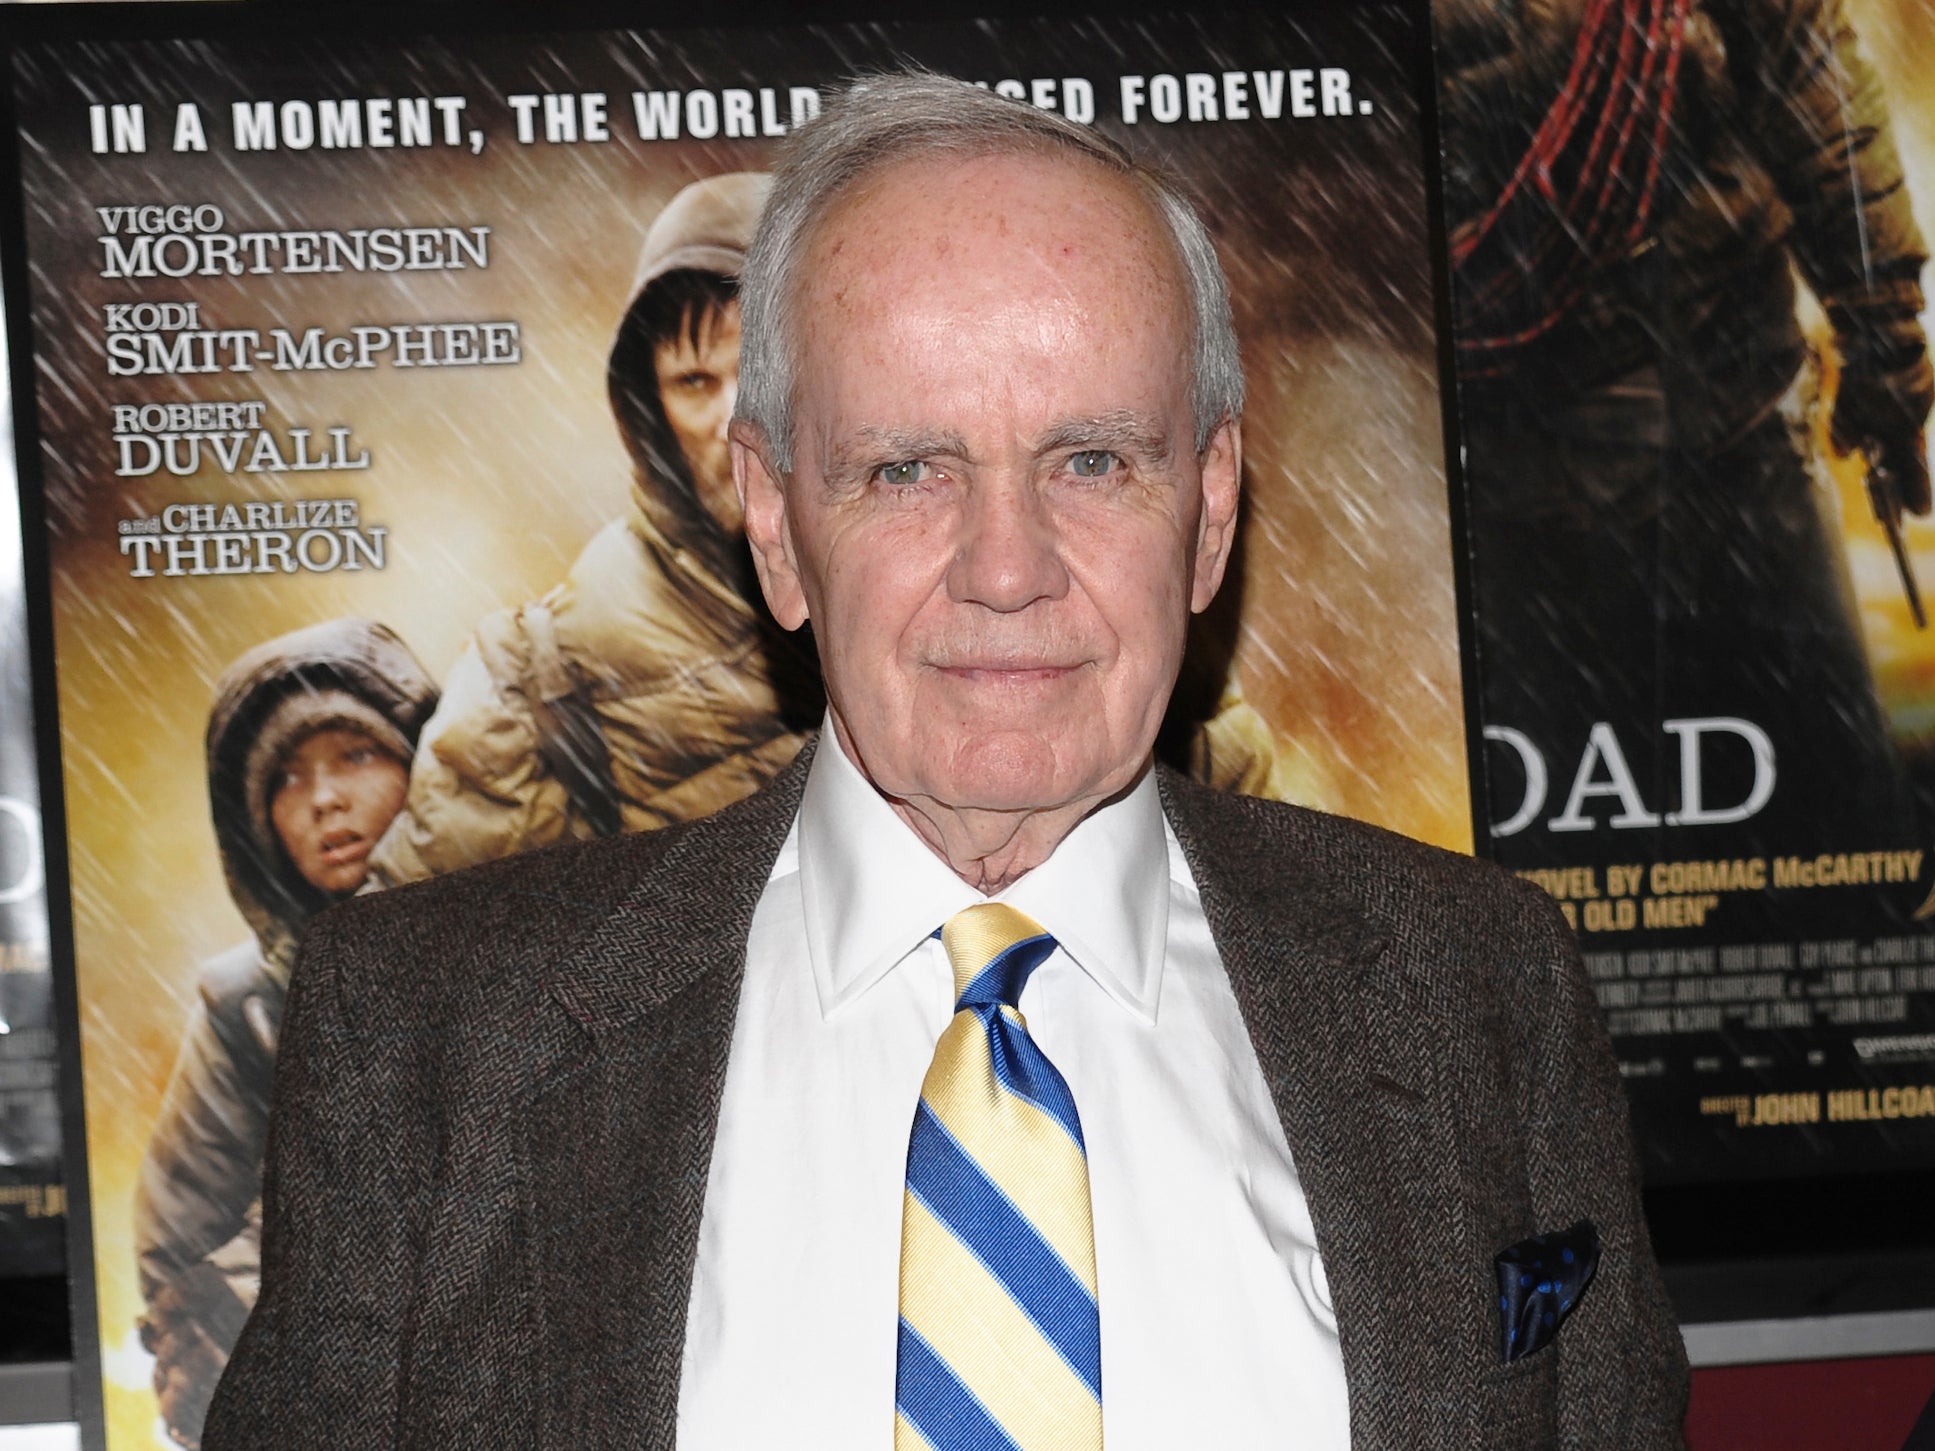 Author Cormac McCarthy at the premiere of ‘The Road’ in New York in November 2009. The novel had landed him a Pulitzer Prize three years earlier